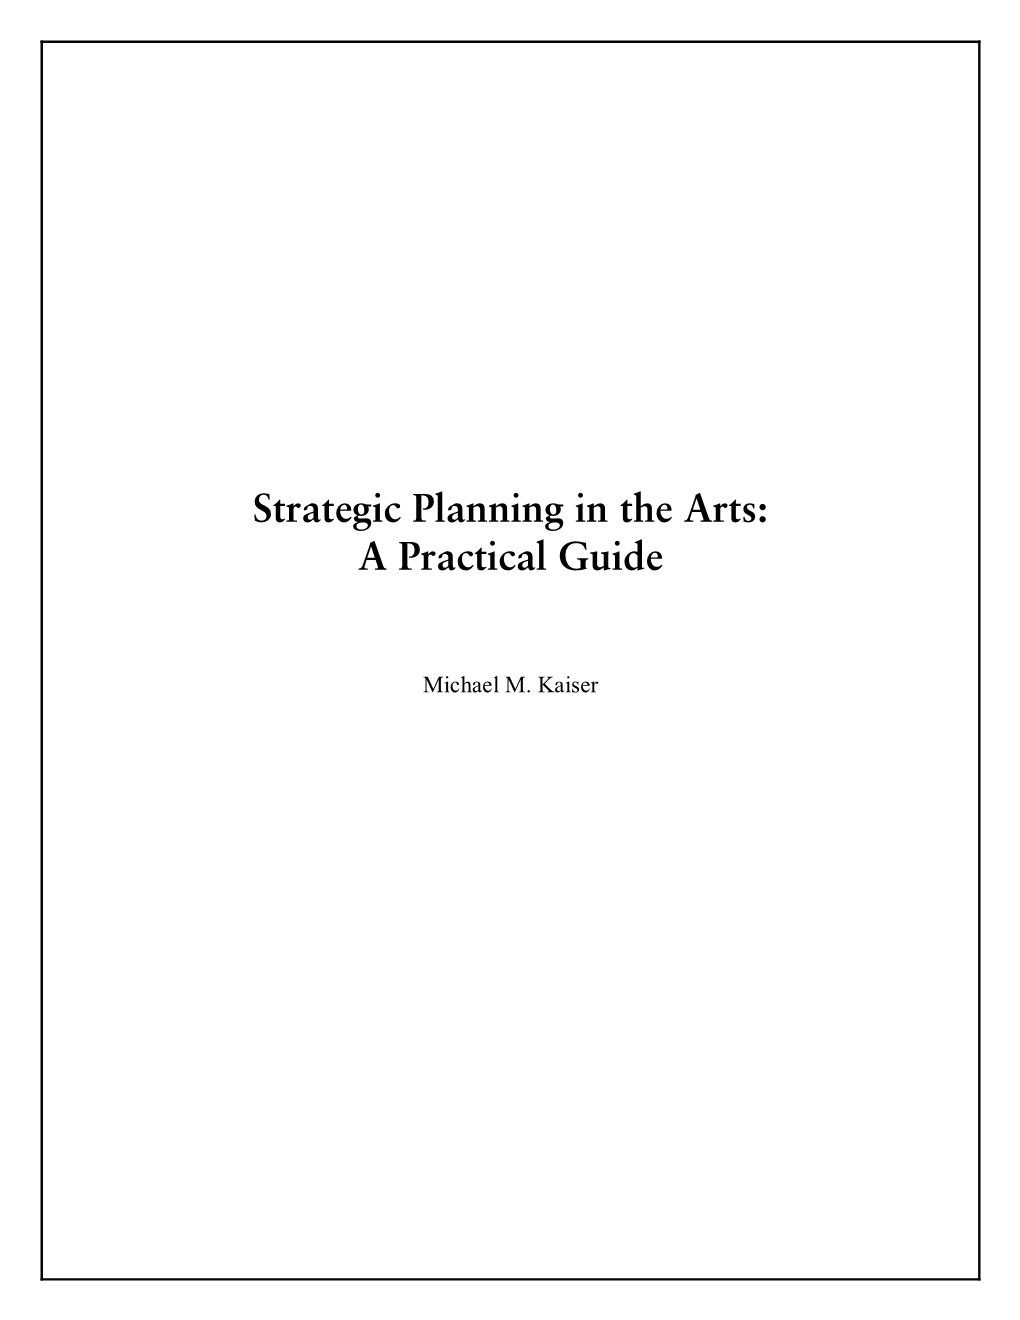 Strategic Planning in the Arts: a Practical Guide